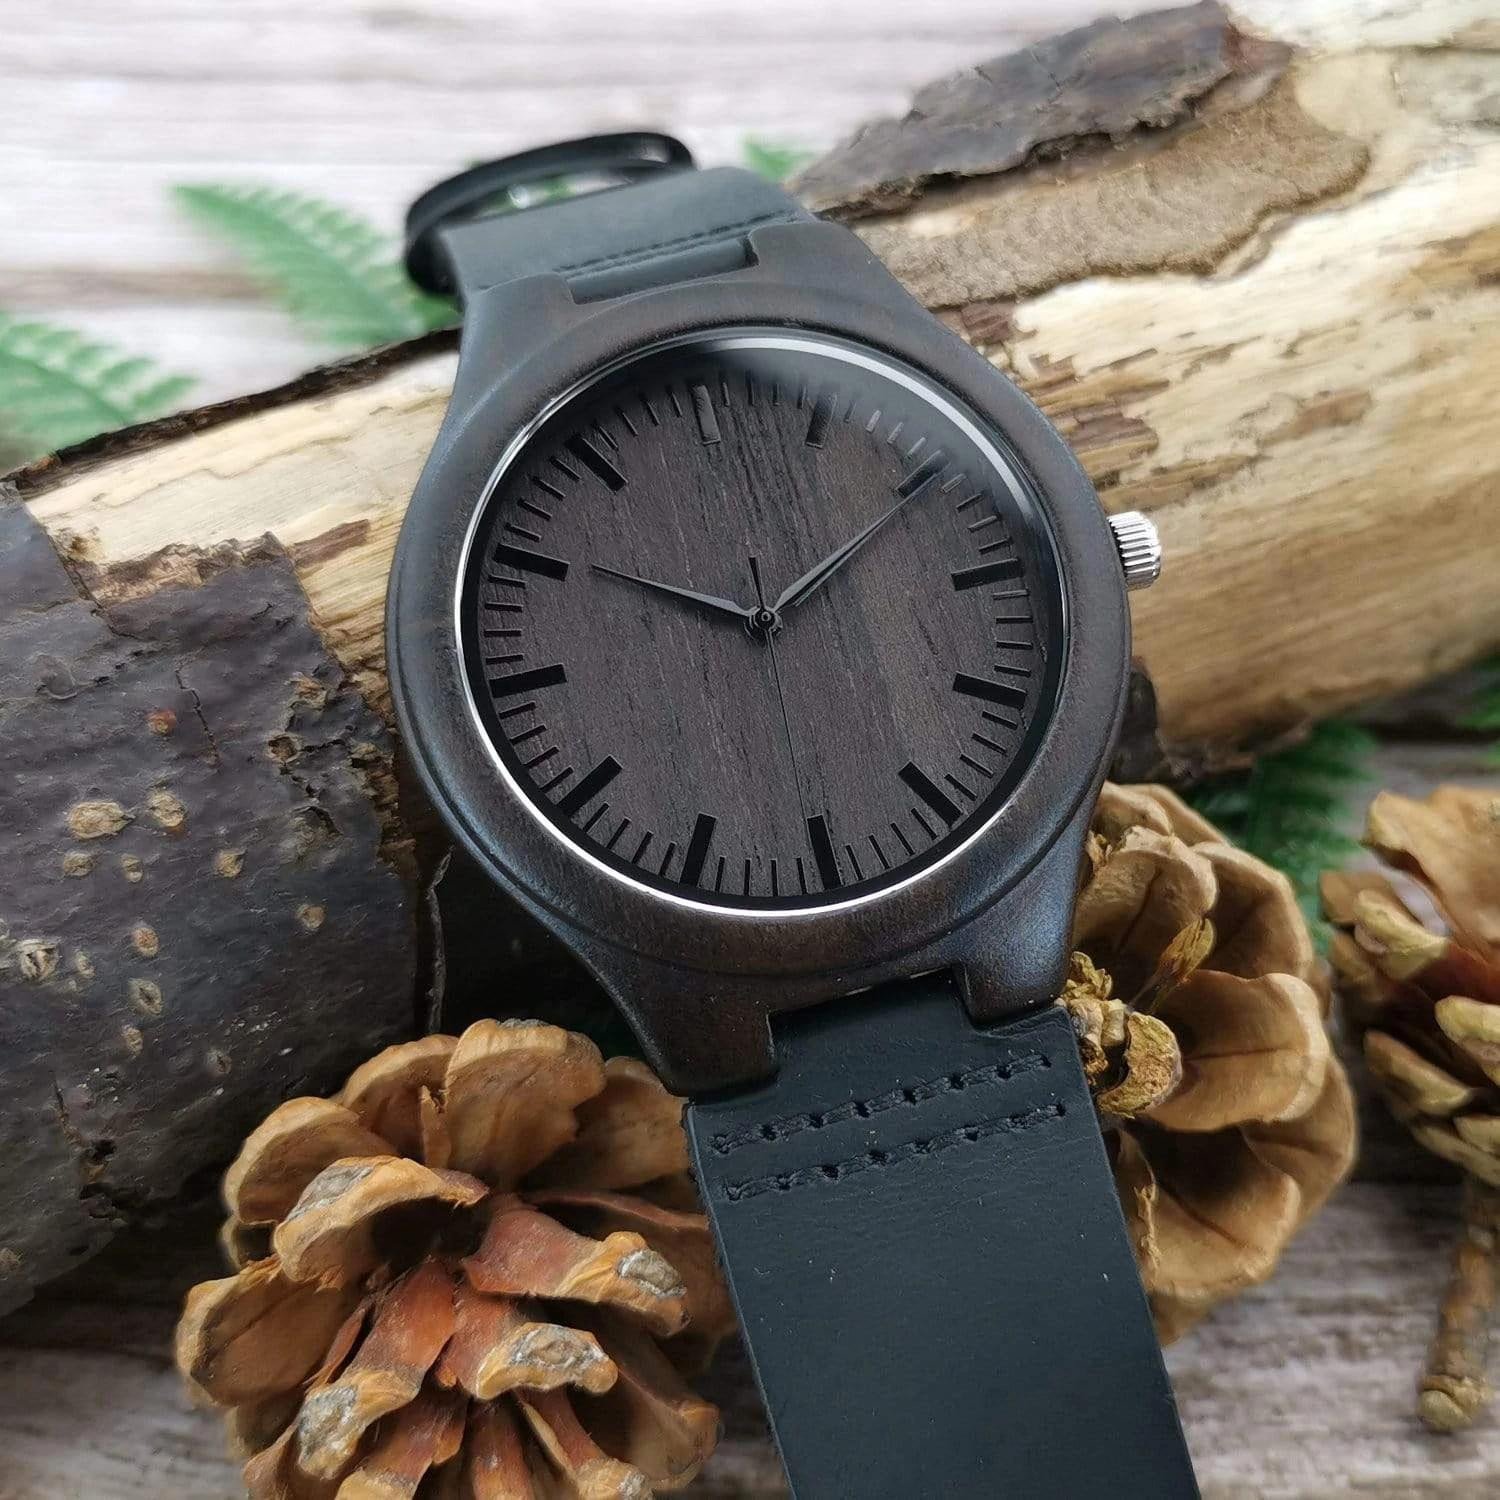 Engraved Wooden Watch Gift For Dad From Son I Love You Always And Forever